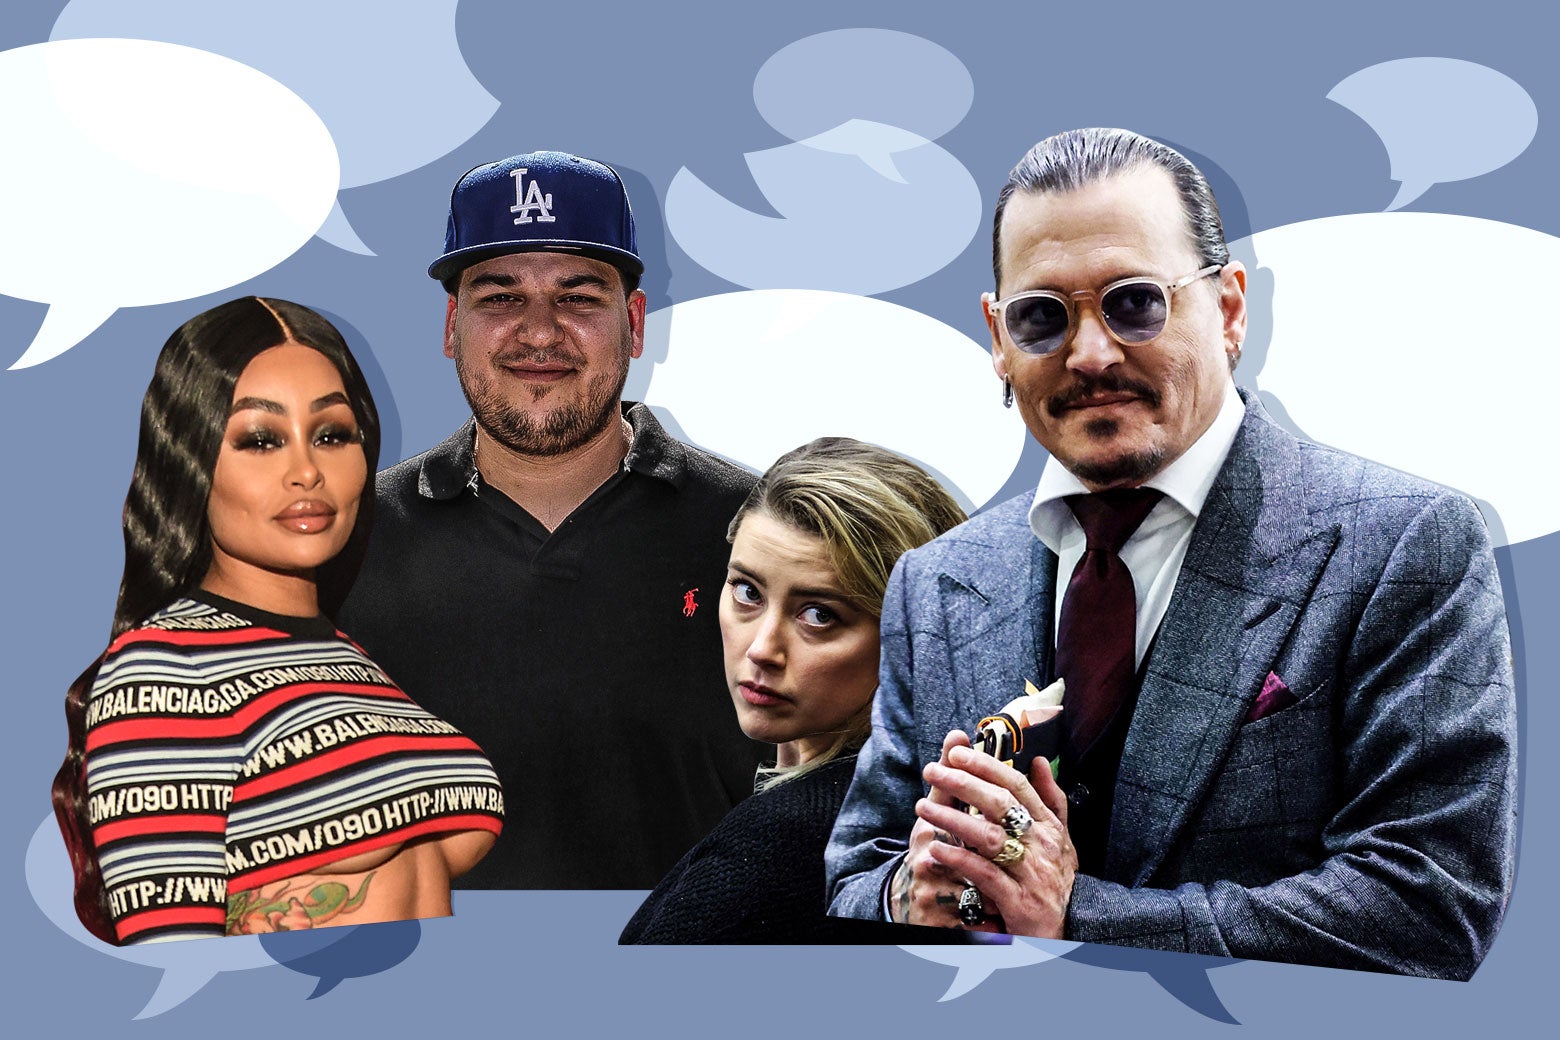 A collage of Johnny Depp, Amber Heard, Blac Chyna, and Rob Kardashians, all celebrities who are involved in high-profile defamation lawsuits this spring.